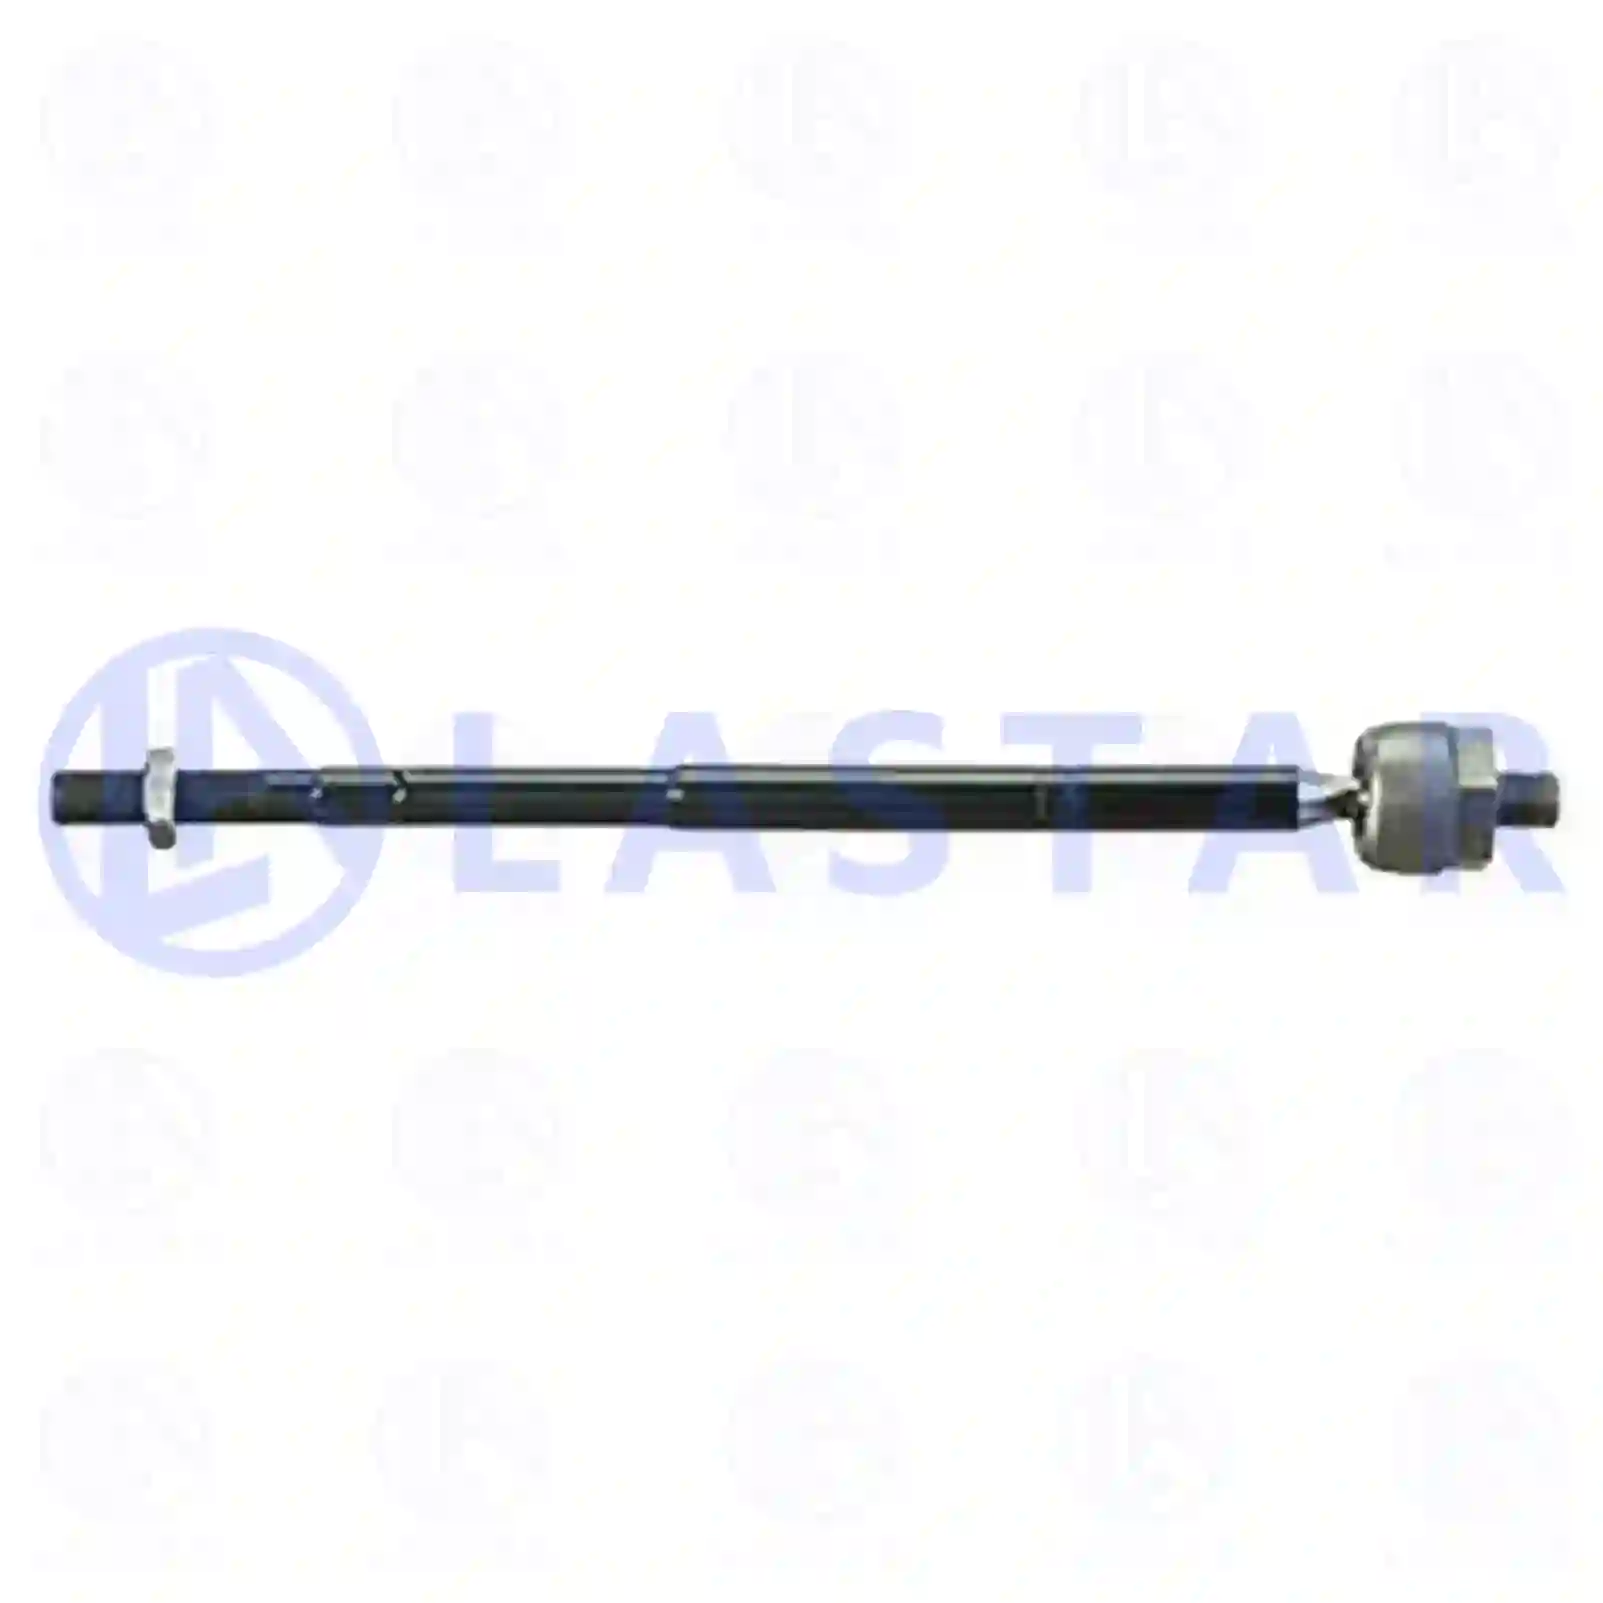 Track Rod Axle joint, track rod, without rubber boots, la no: 77730314 ,  oem no:1763991, BK21-3L519-AA, Lastar Spare Part | Truck Spare Parts, Auotomotive Spare Parts